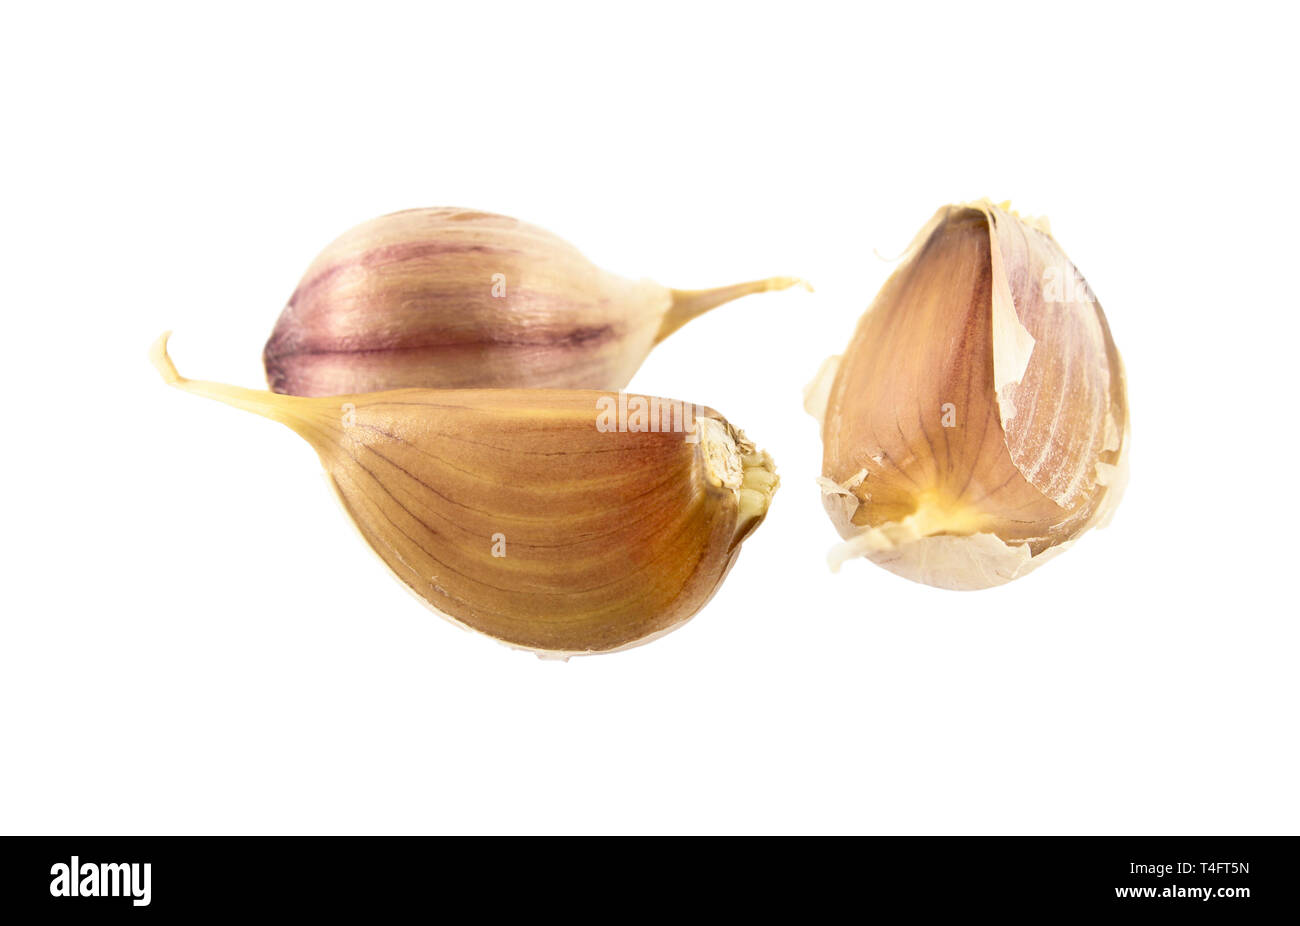 A few cloves of garlic isolated on white Stock Photo